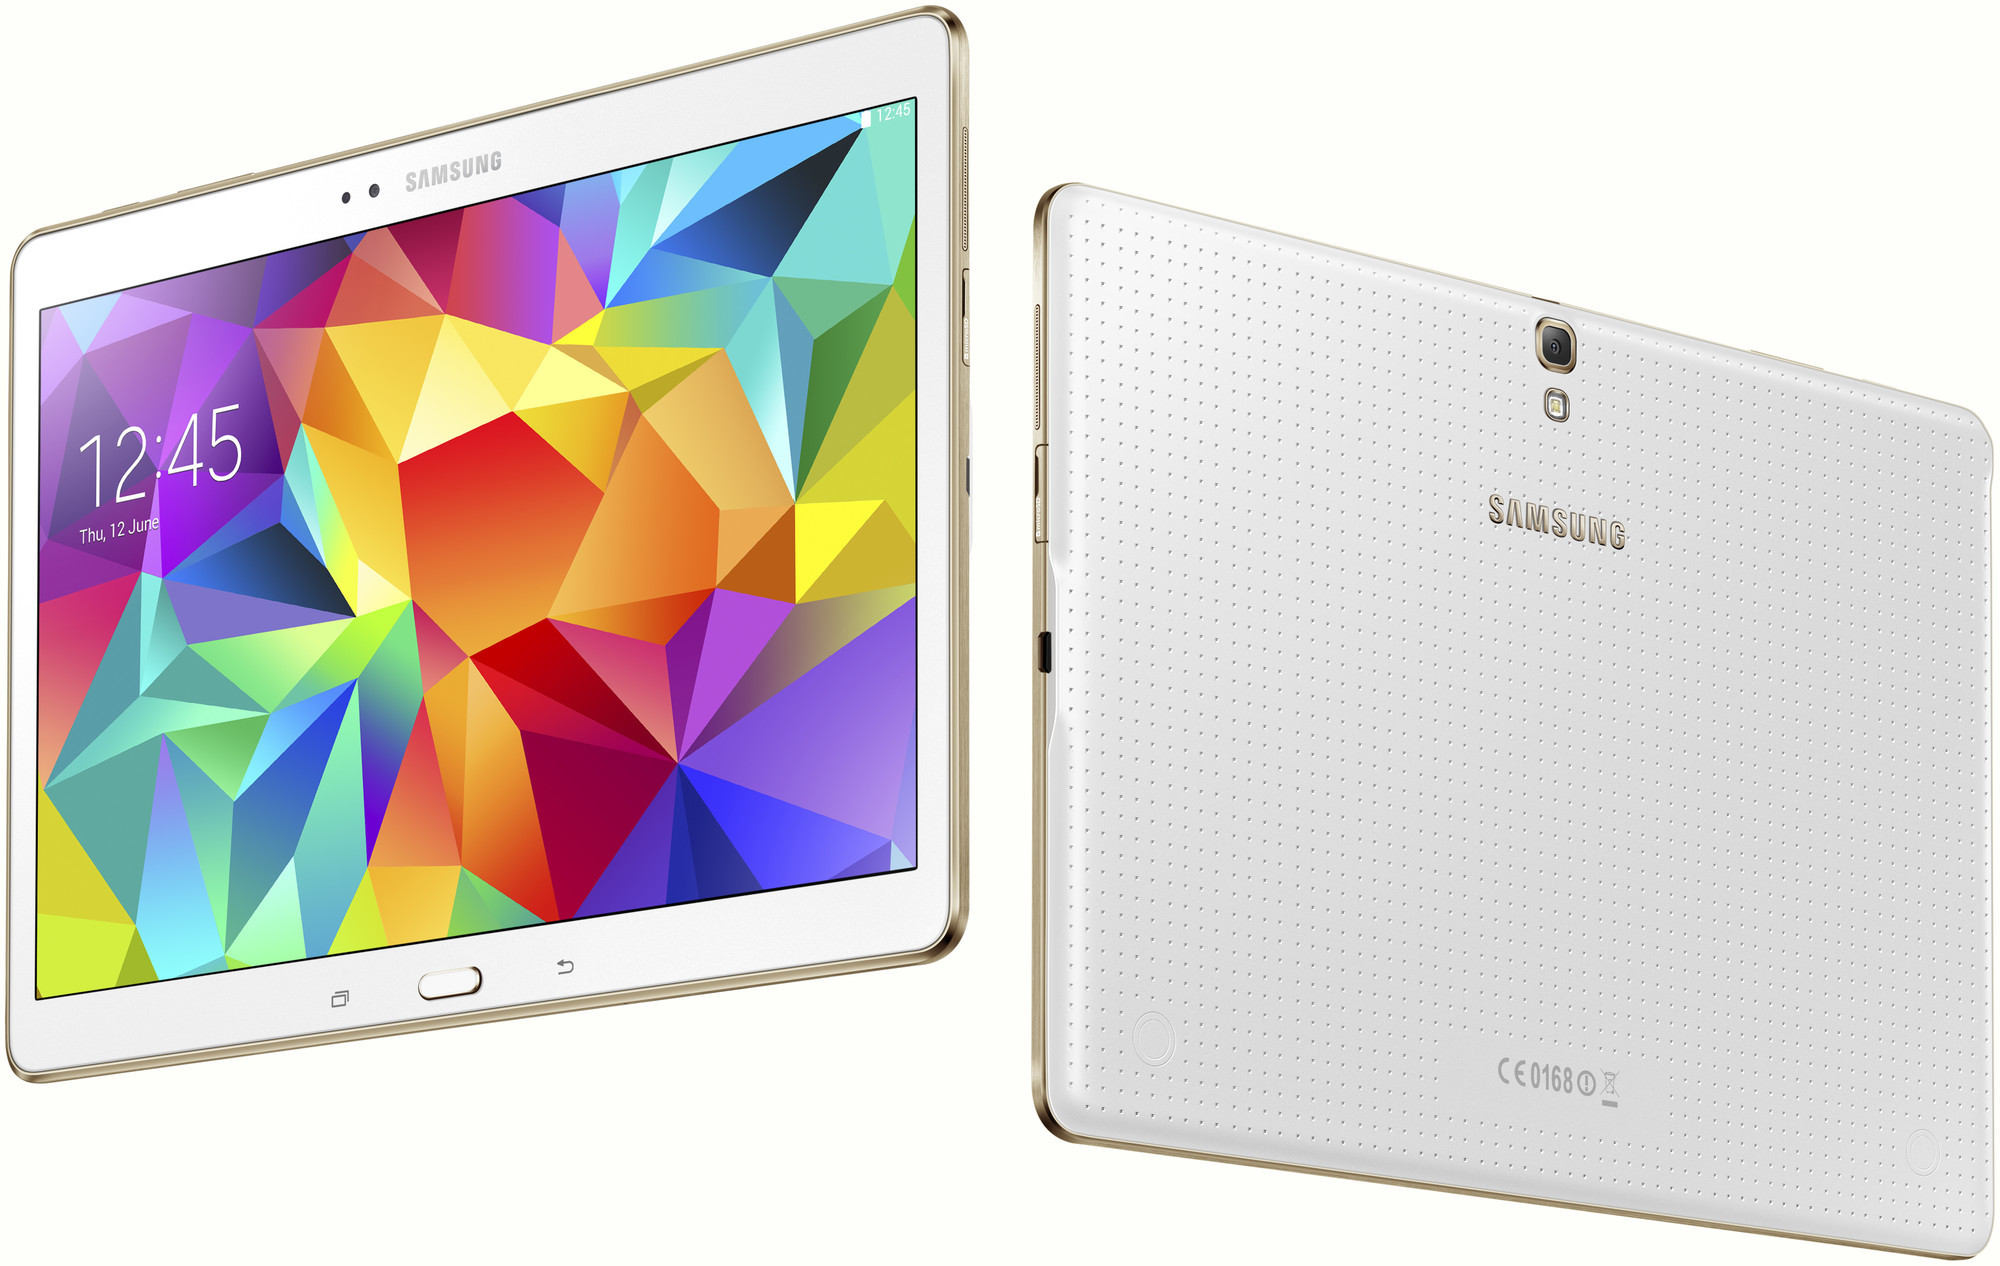 Samsung Galaxy Tab S 10.5 SM-T800 16GB - Specs and Price - Phonegg